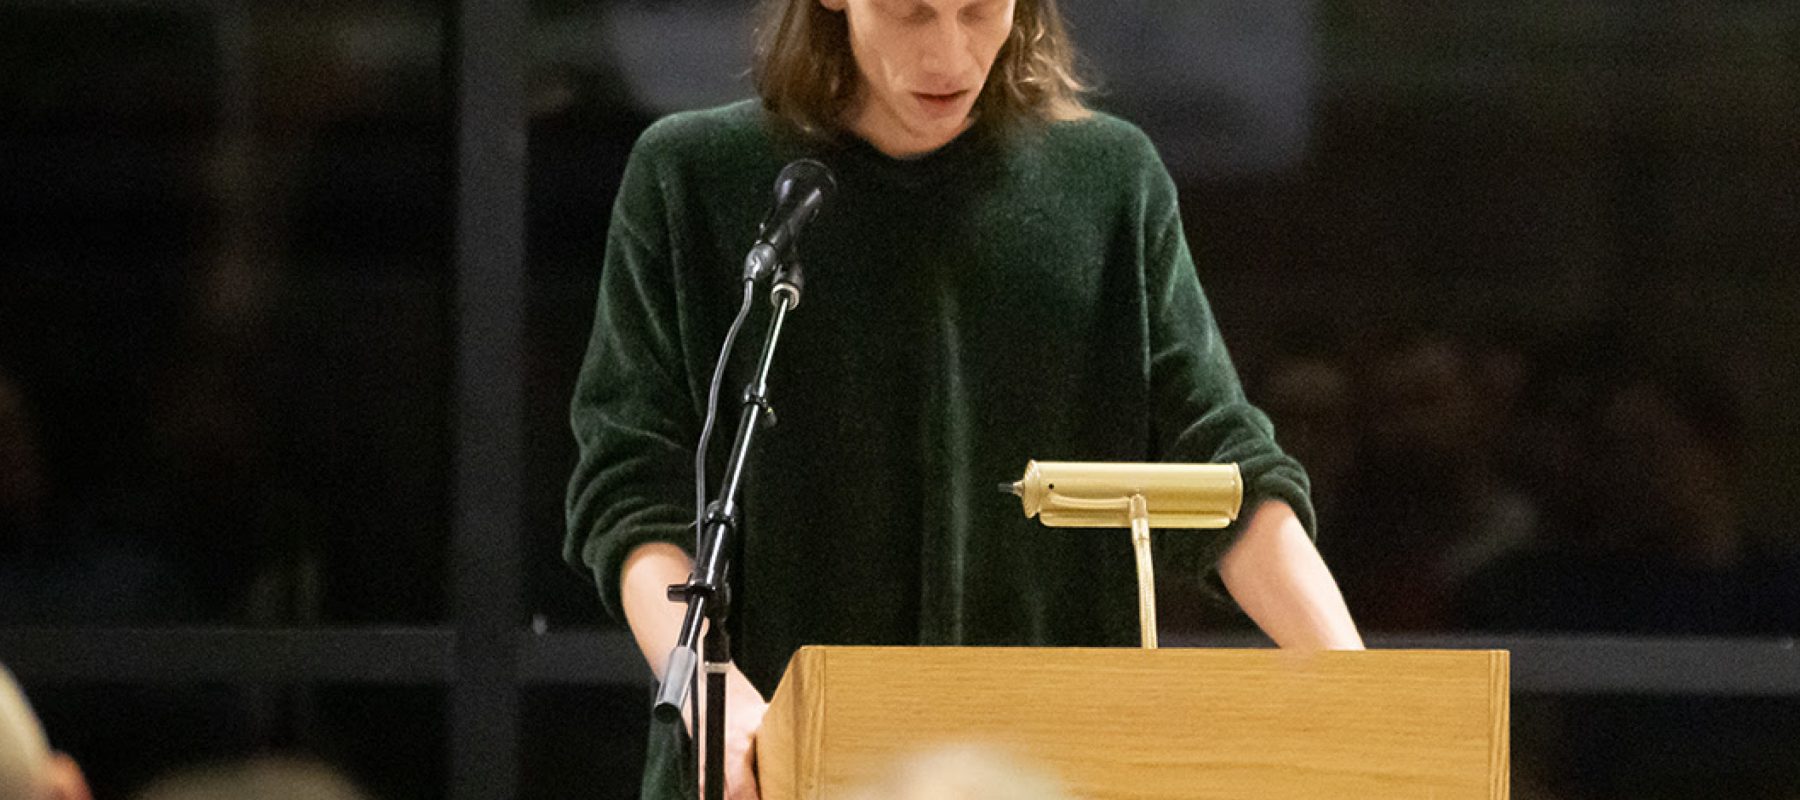 A person standing in front of a microphone